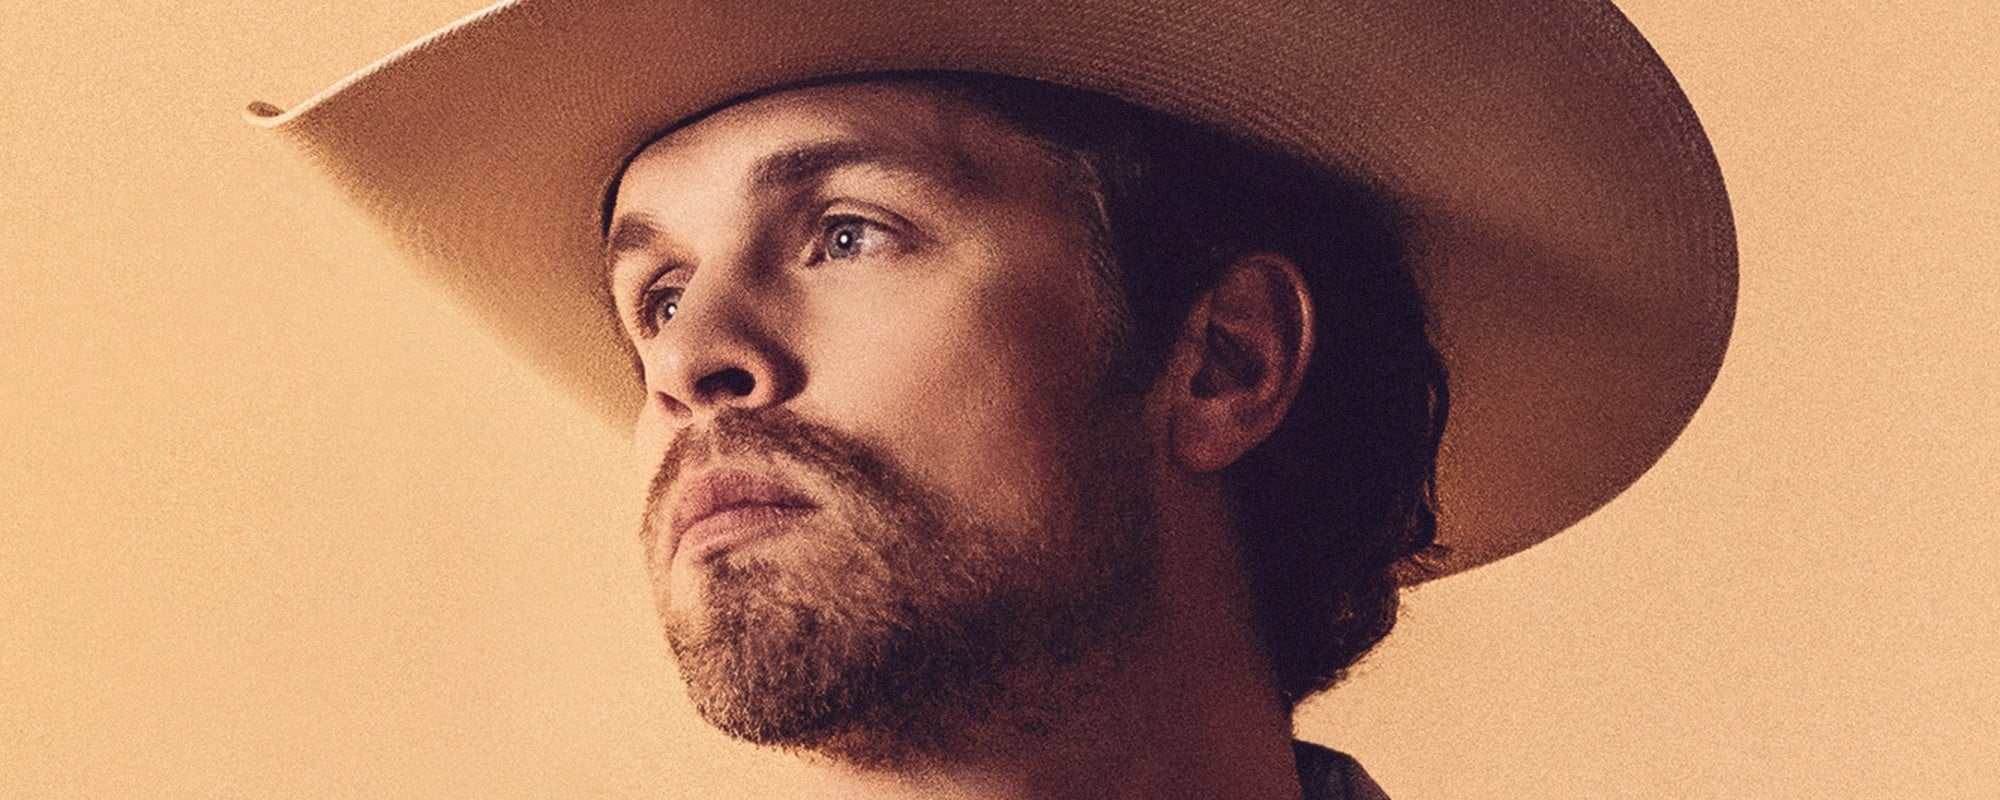 Dustin Lynch Revamps “Thinking ‘Bout You” With MacKenzie Porter